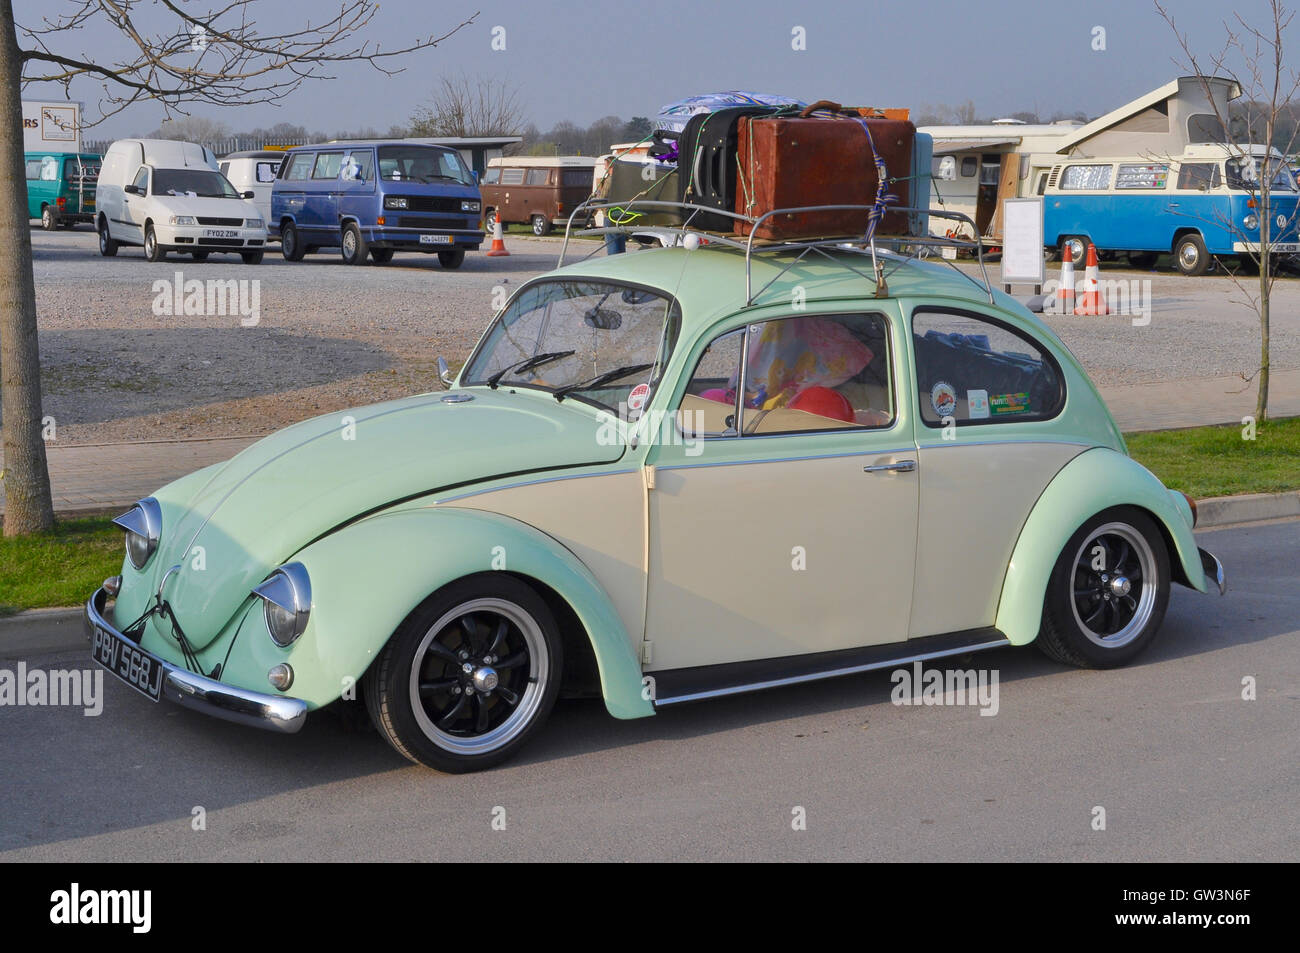 A Classic VW Beetle with luggage rack, parked with classic VW camper vans in the background. Stock Photo